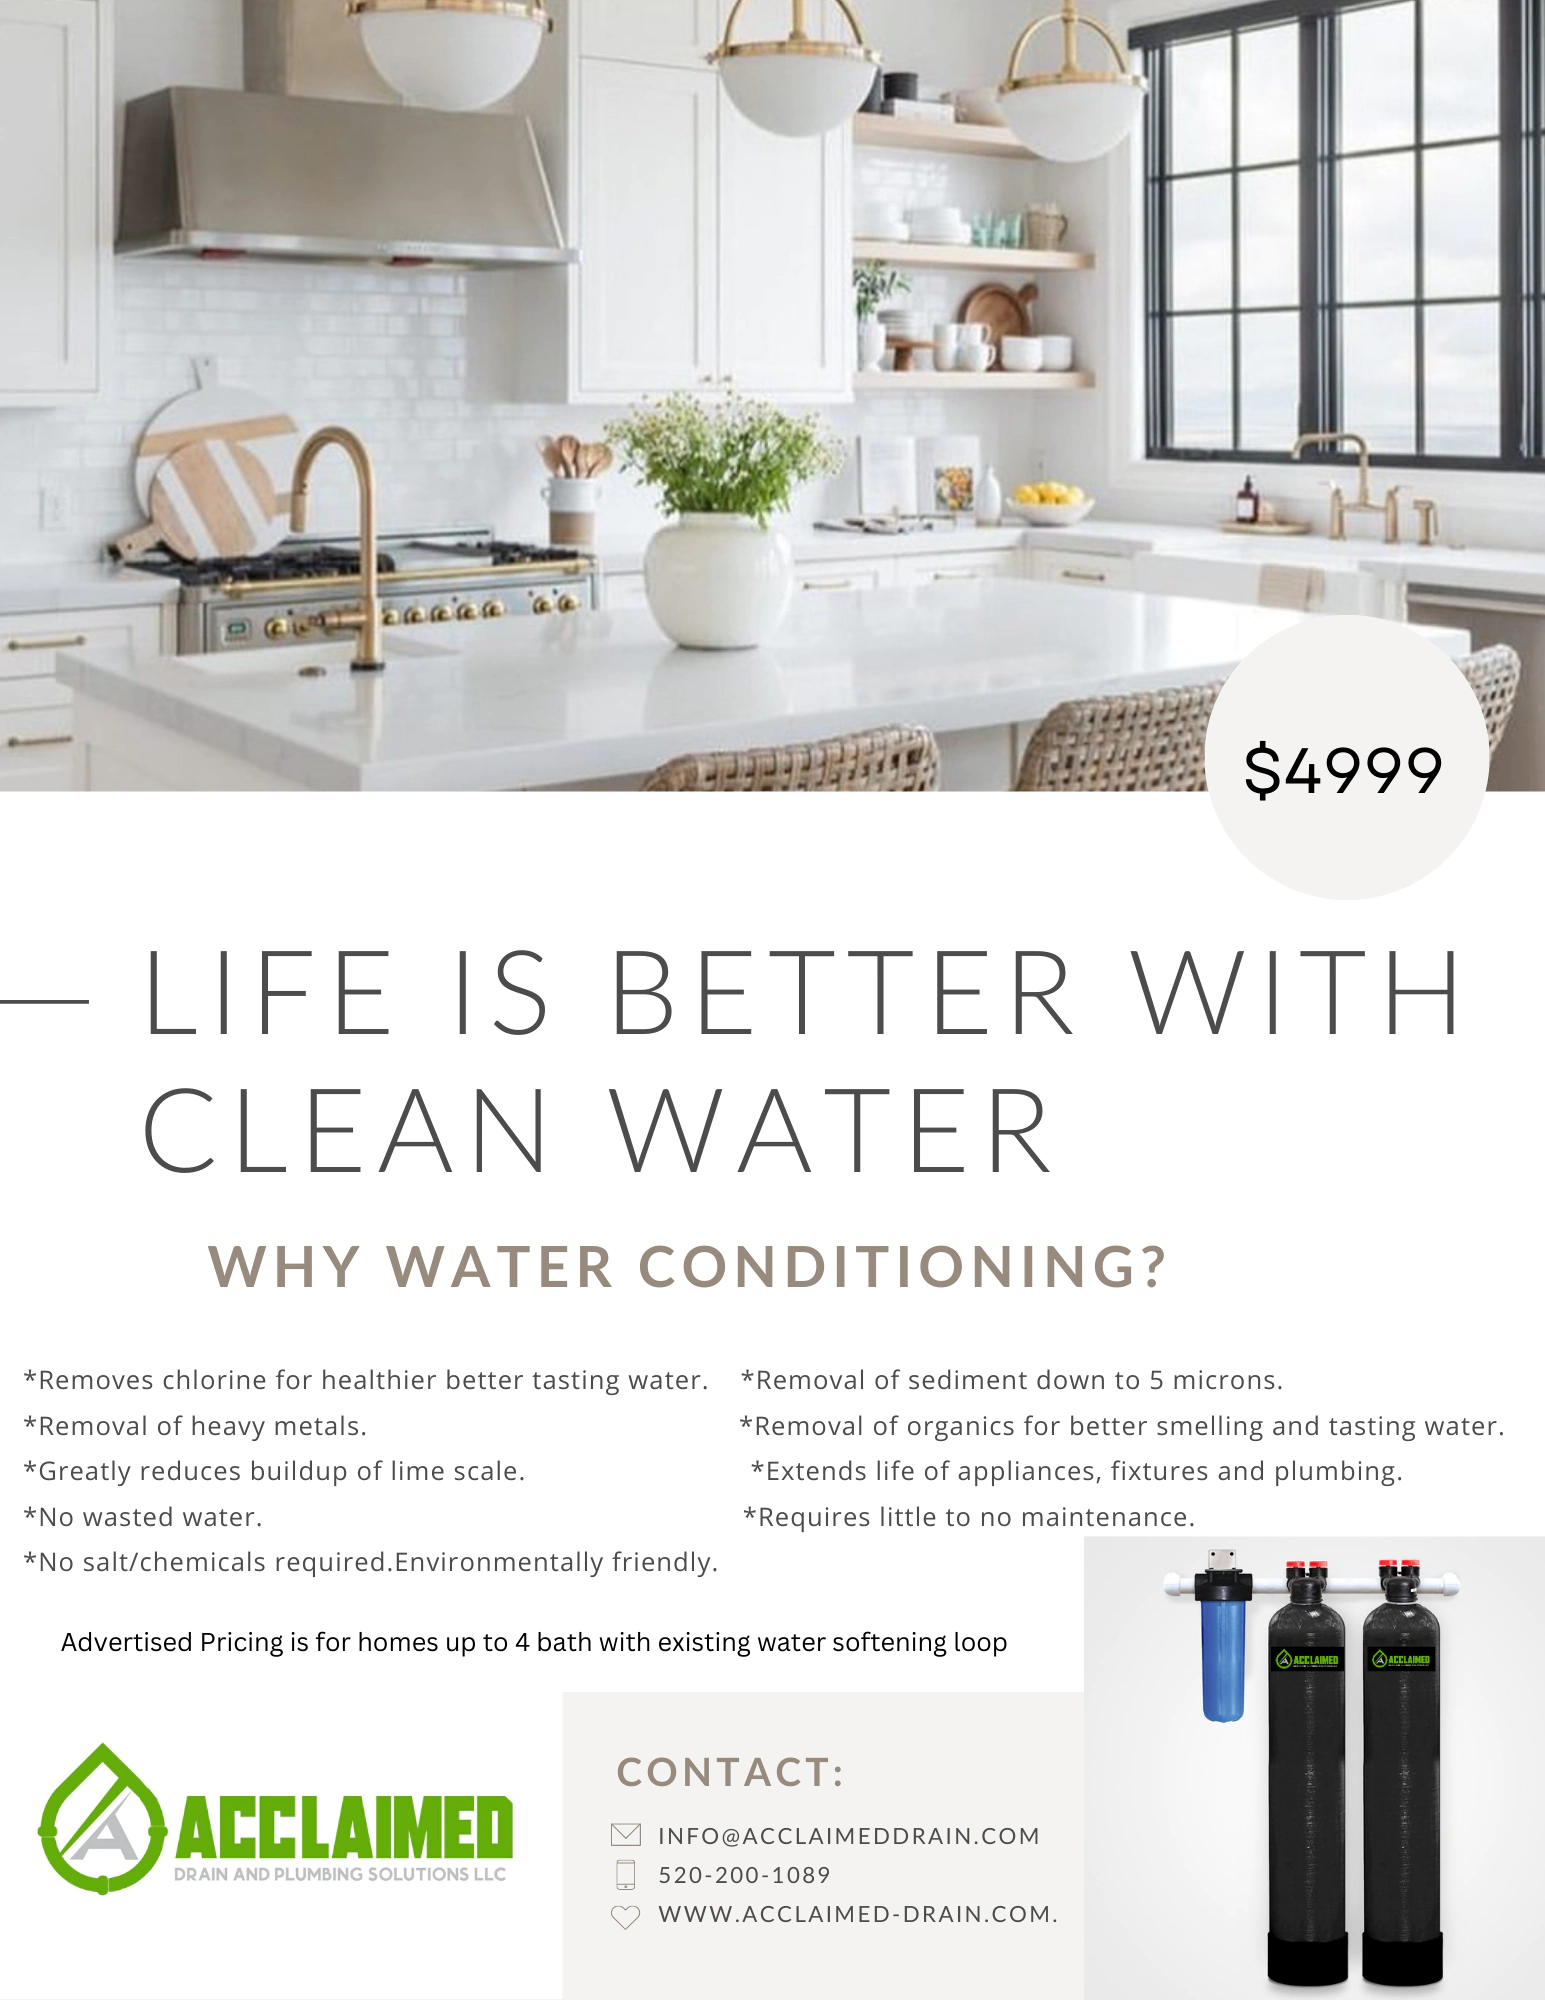 Life is better with clean water 4999